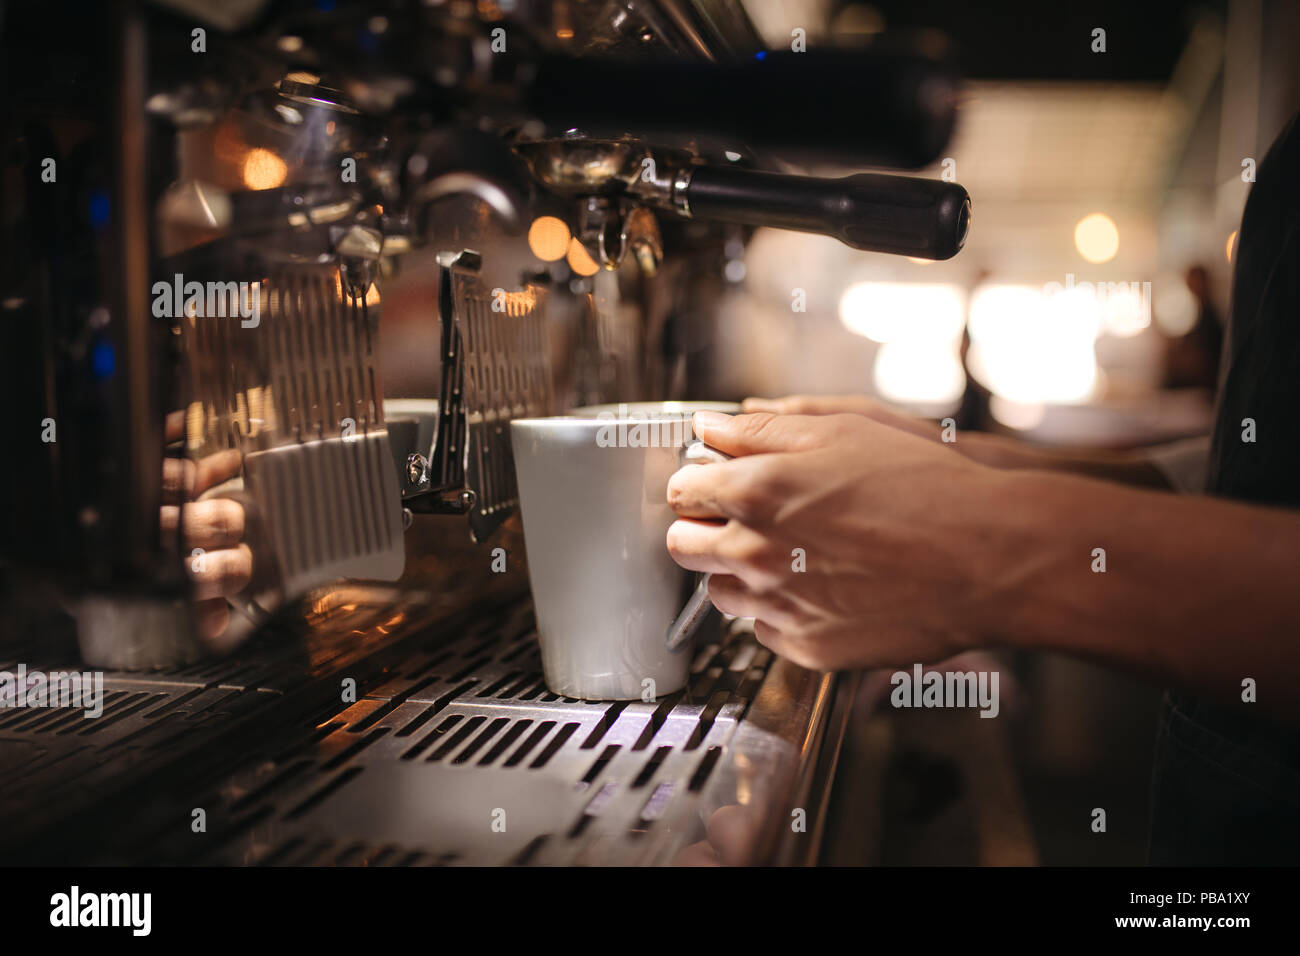 Close up of barista holding a cup under coffee maker. Female cafe worker preparing coffee in machine. Stock Photo